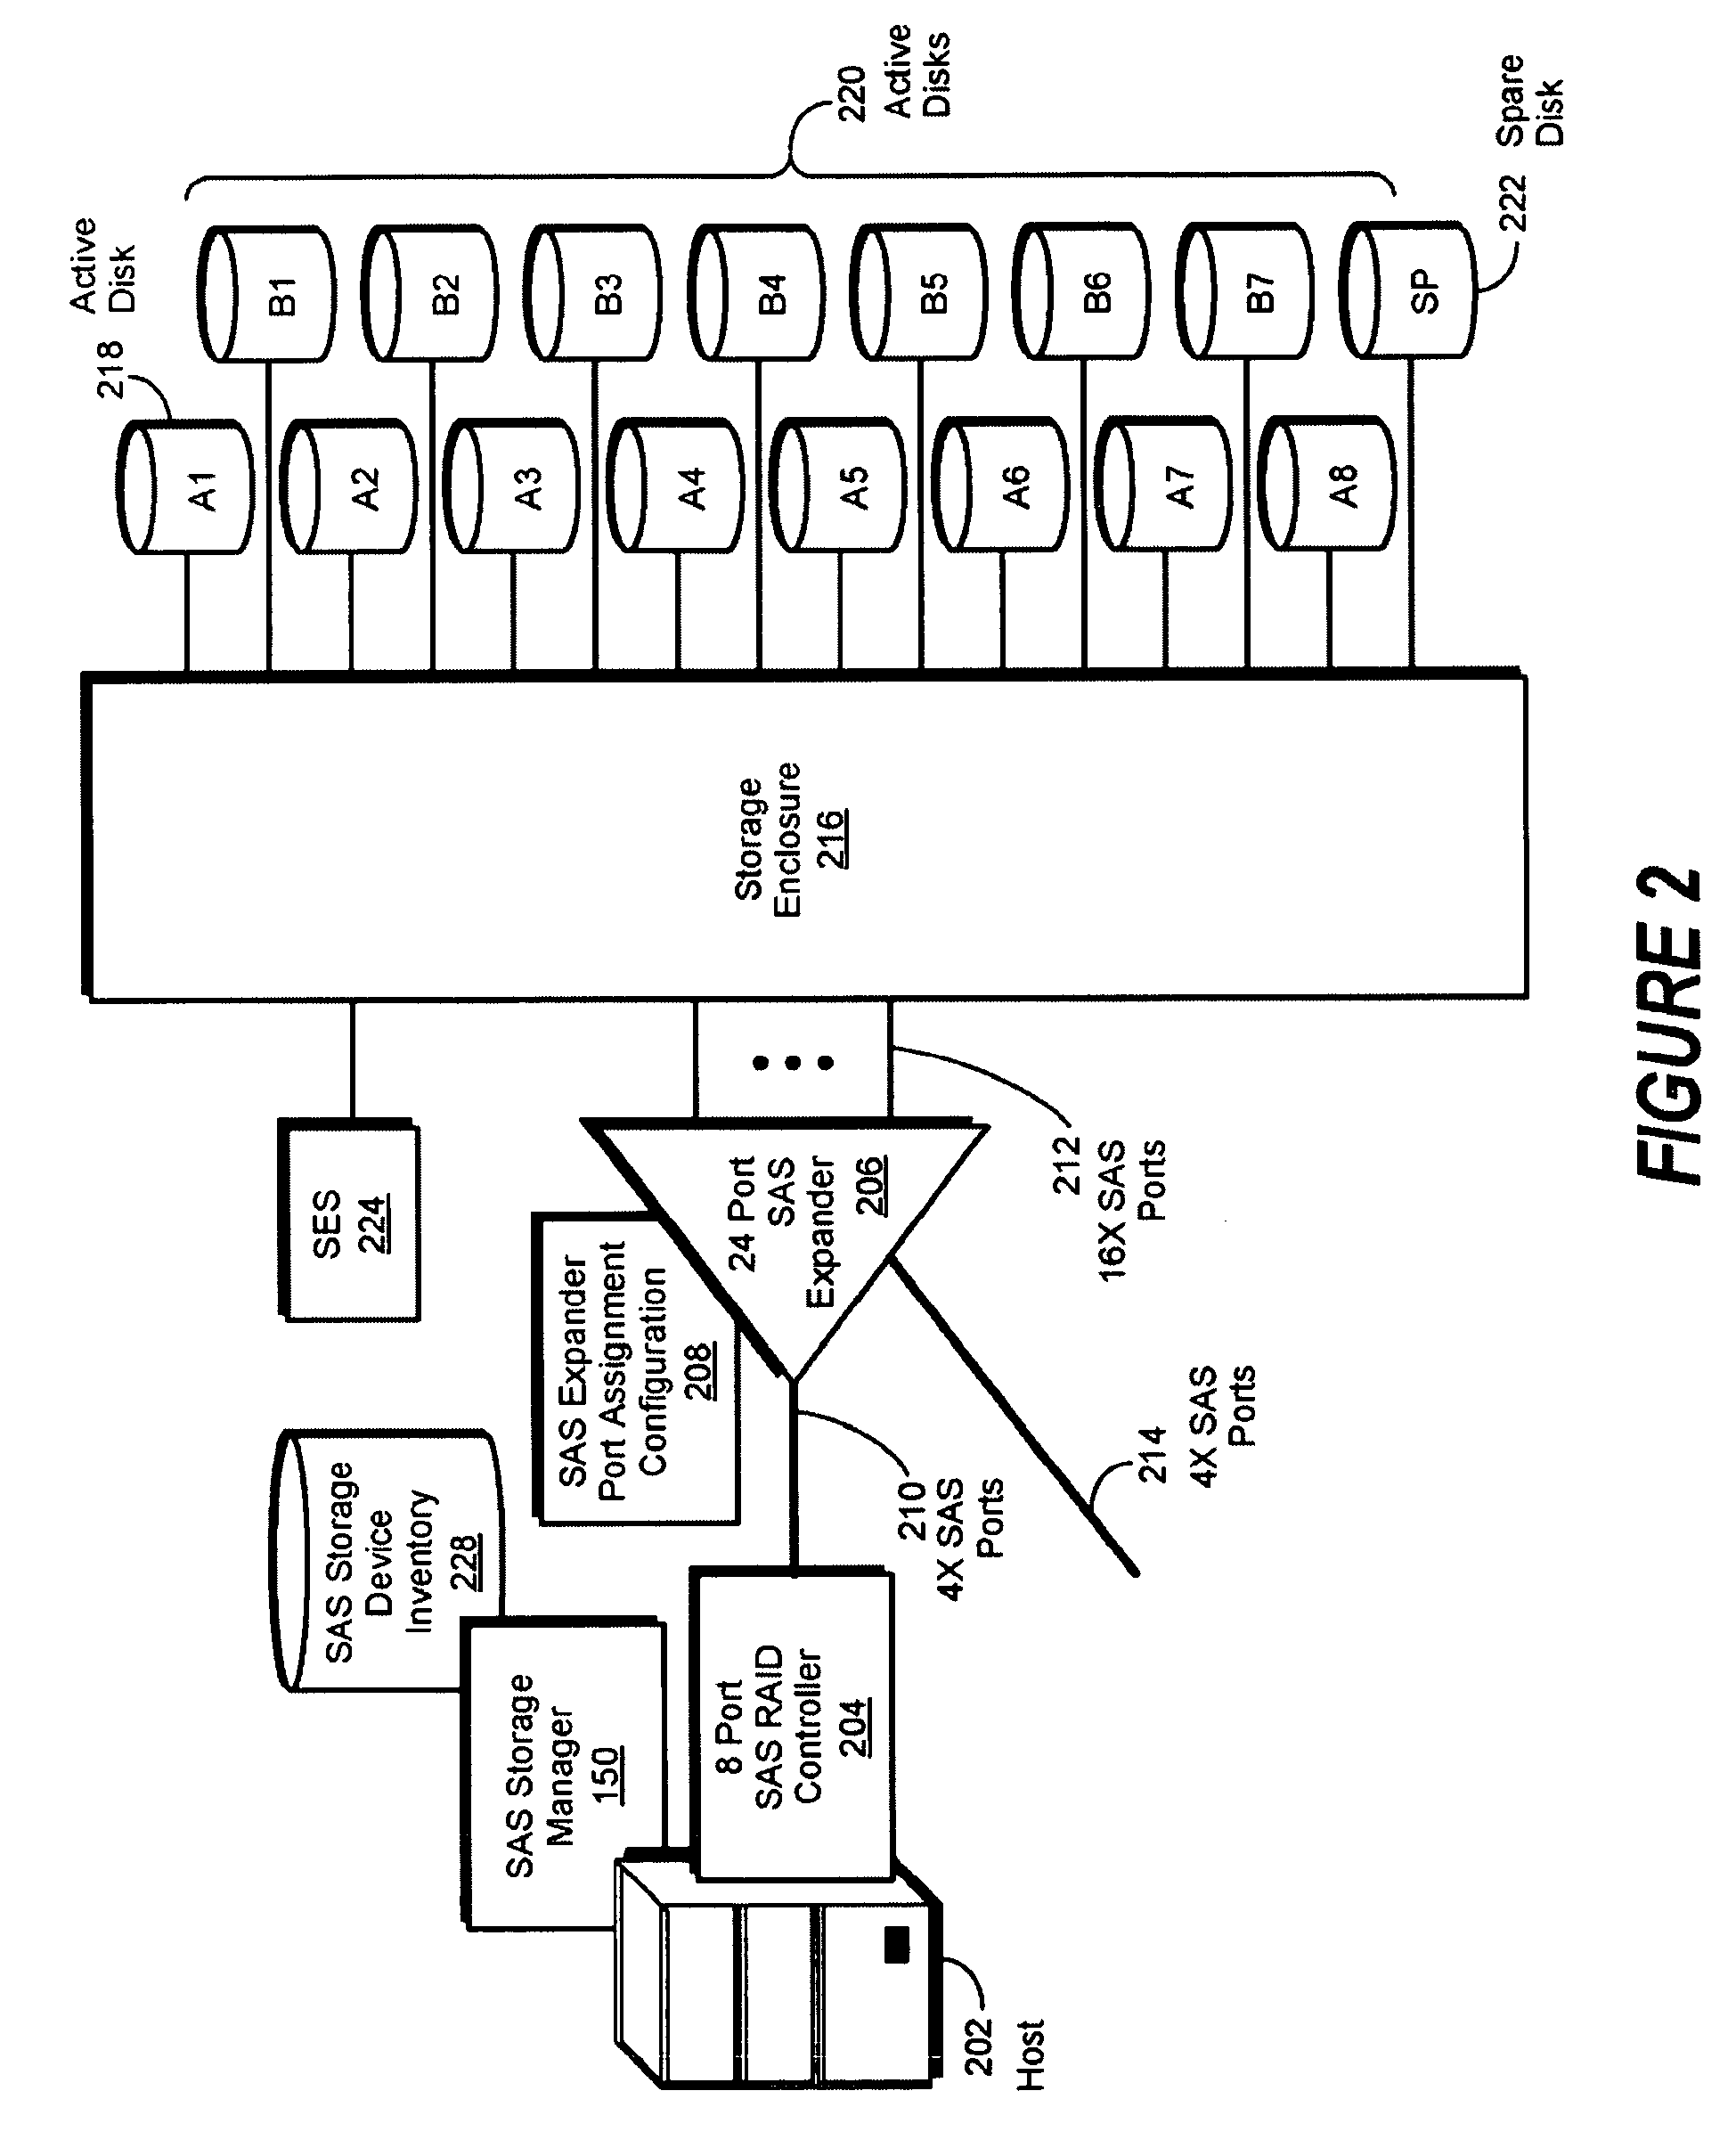 System and method of maximization of storage capacity in a configuration limited system